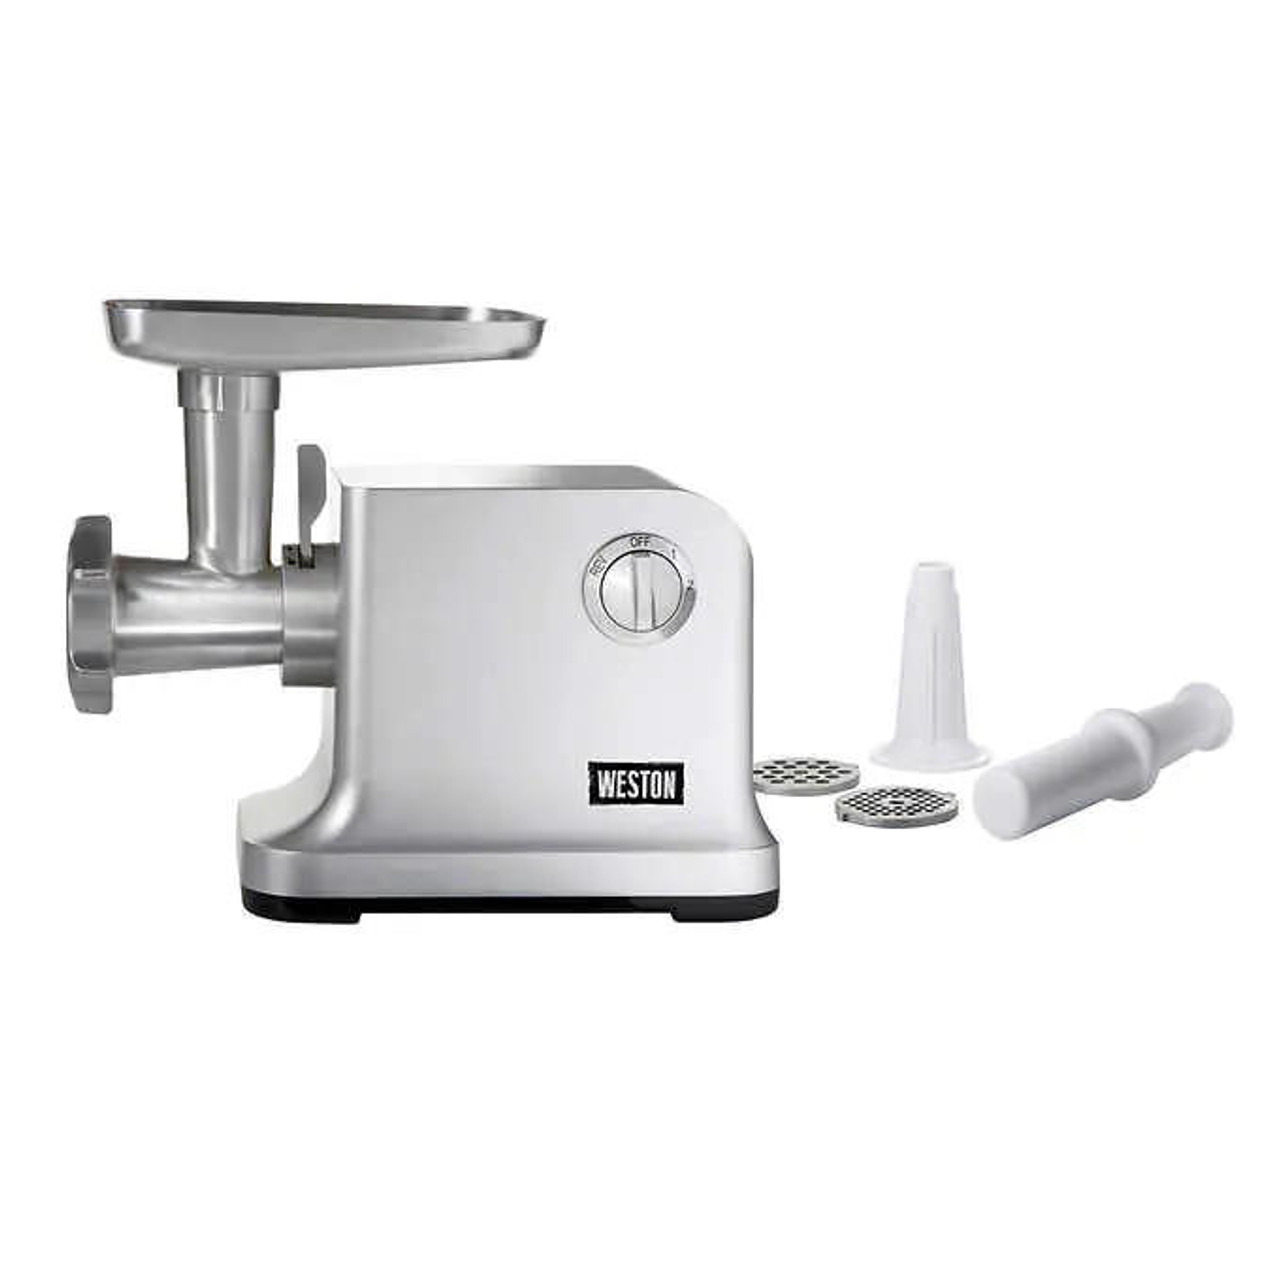 Weston Electric Meat Grinder & Sausage Stuffer - 750W Power and Precision- Chicken Pieces